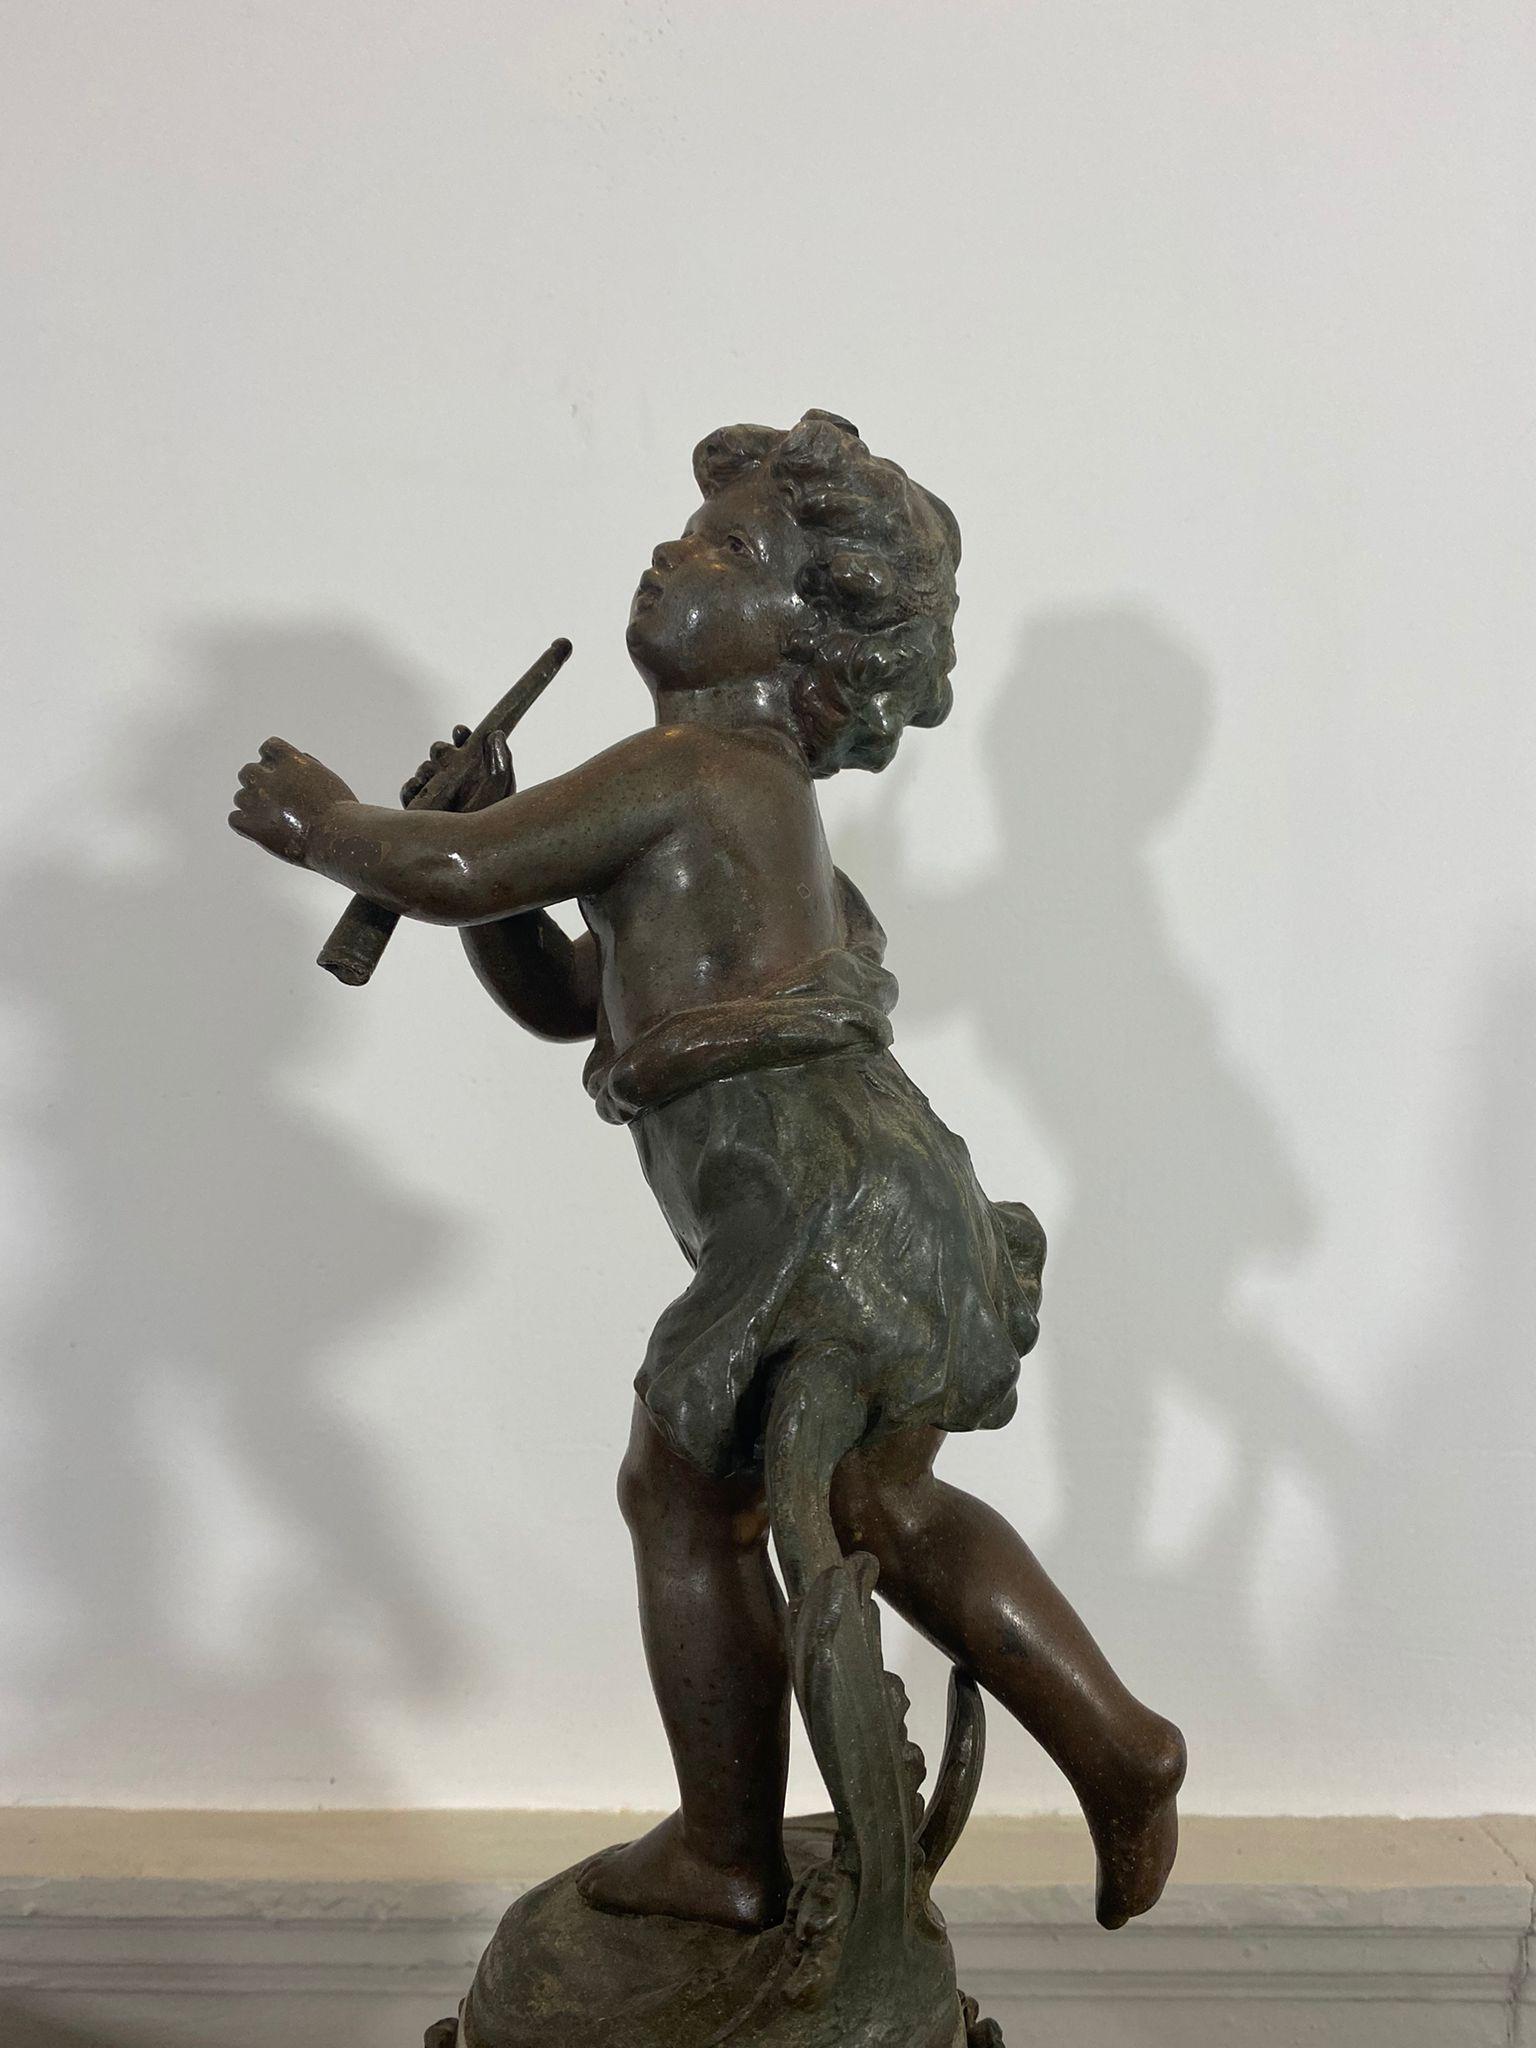 Charming sculpture in spelter with bronze patina, in the style of Auguste Moreau, representing a young flute player dressed in country clothes, carrying his flute in his left hand and seems to be in motion (by the position of his legs and the effect